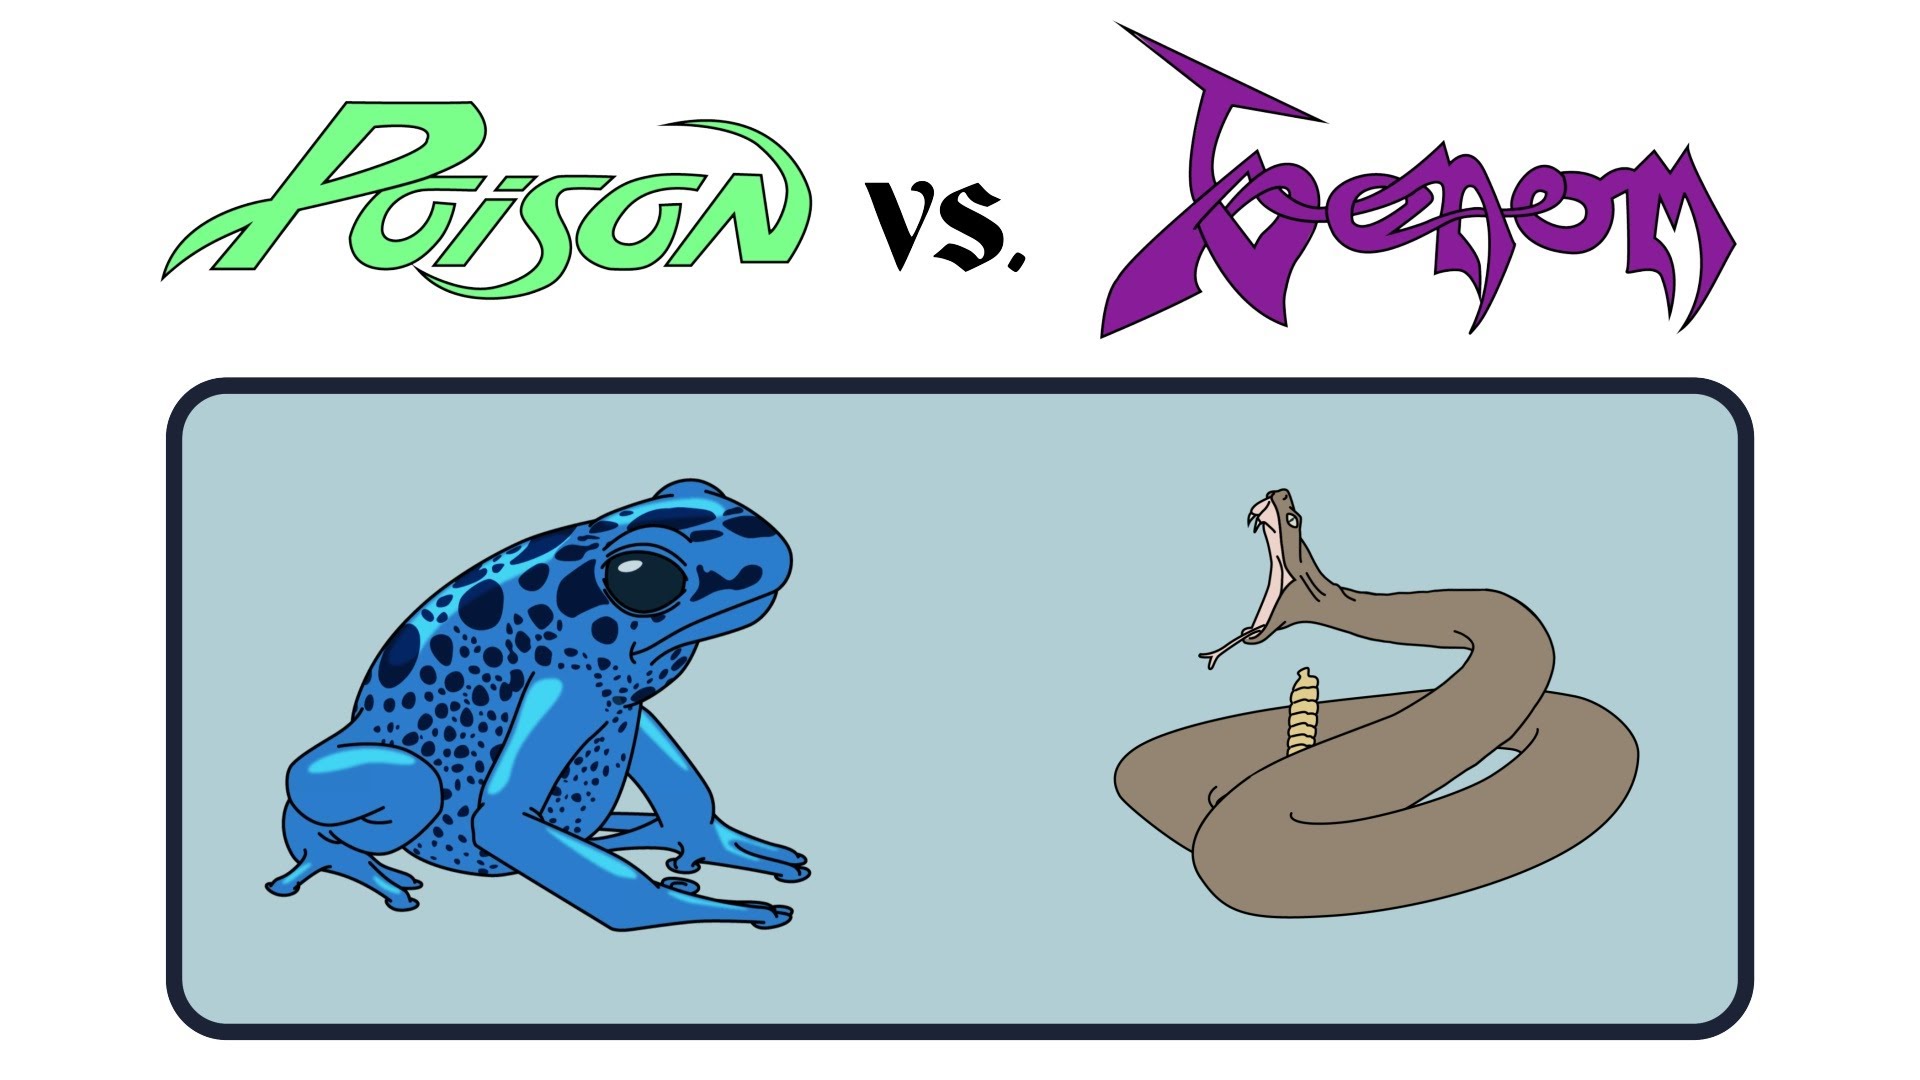 Venom versus Poison: what's the difference?